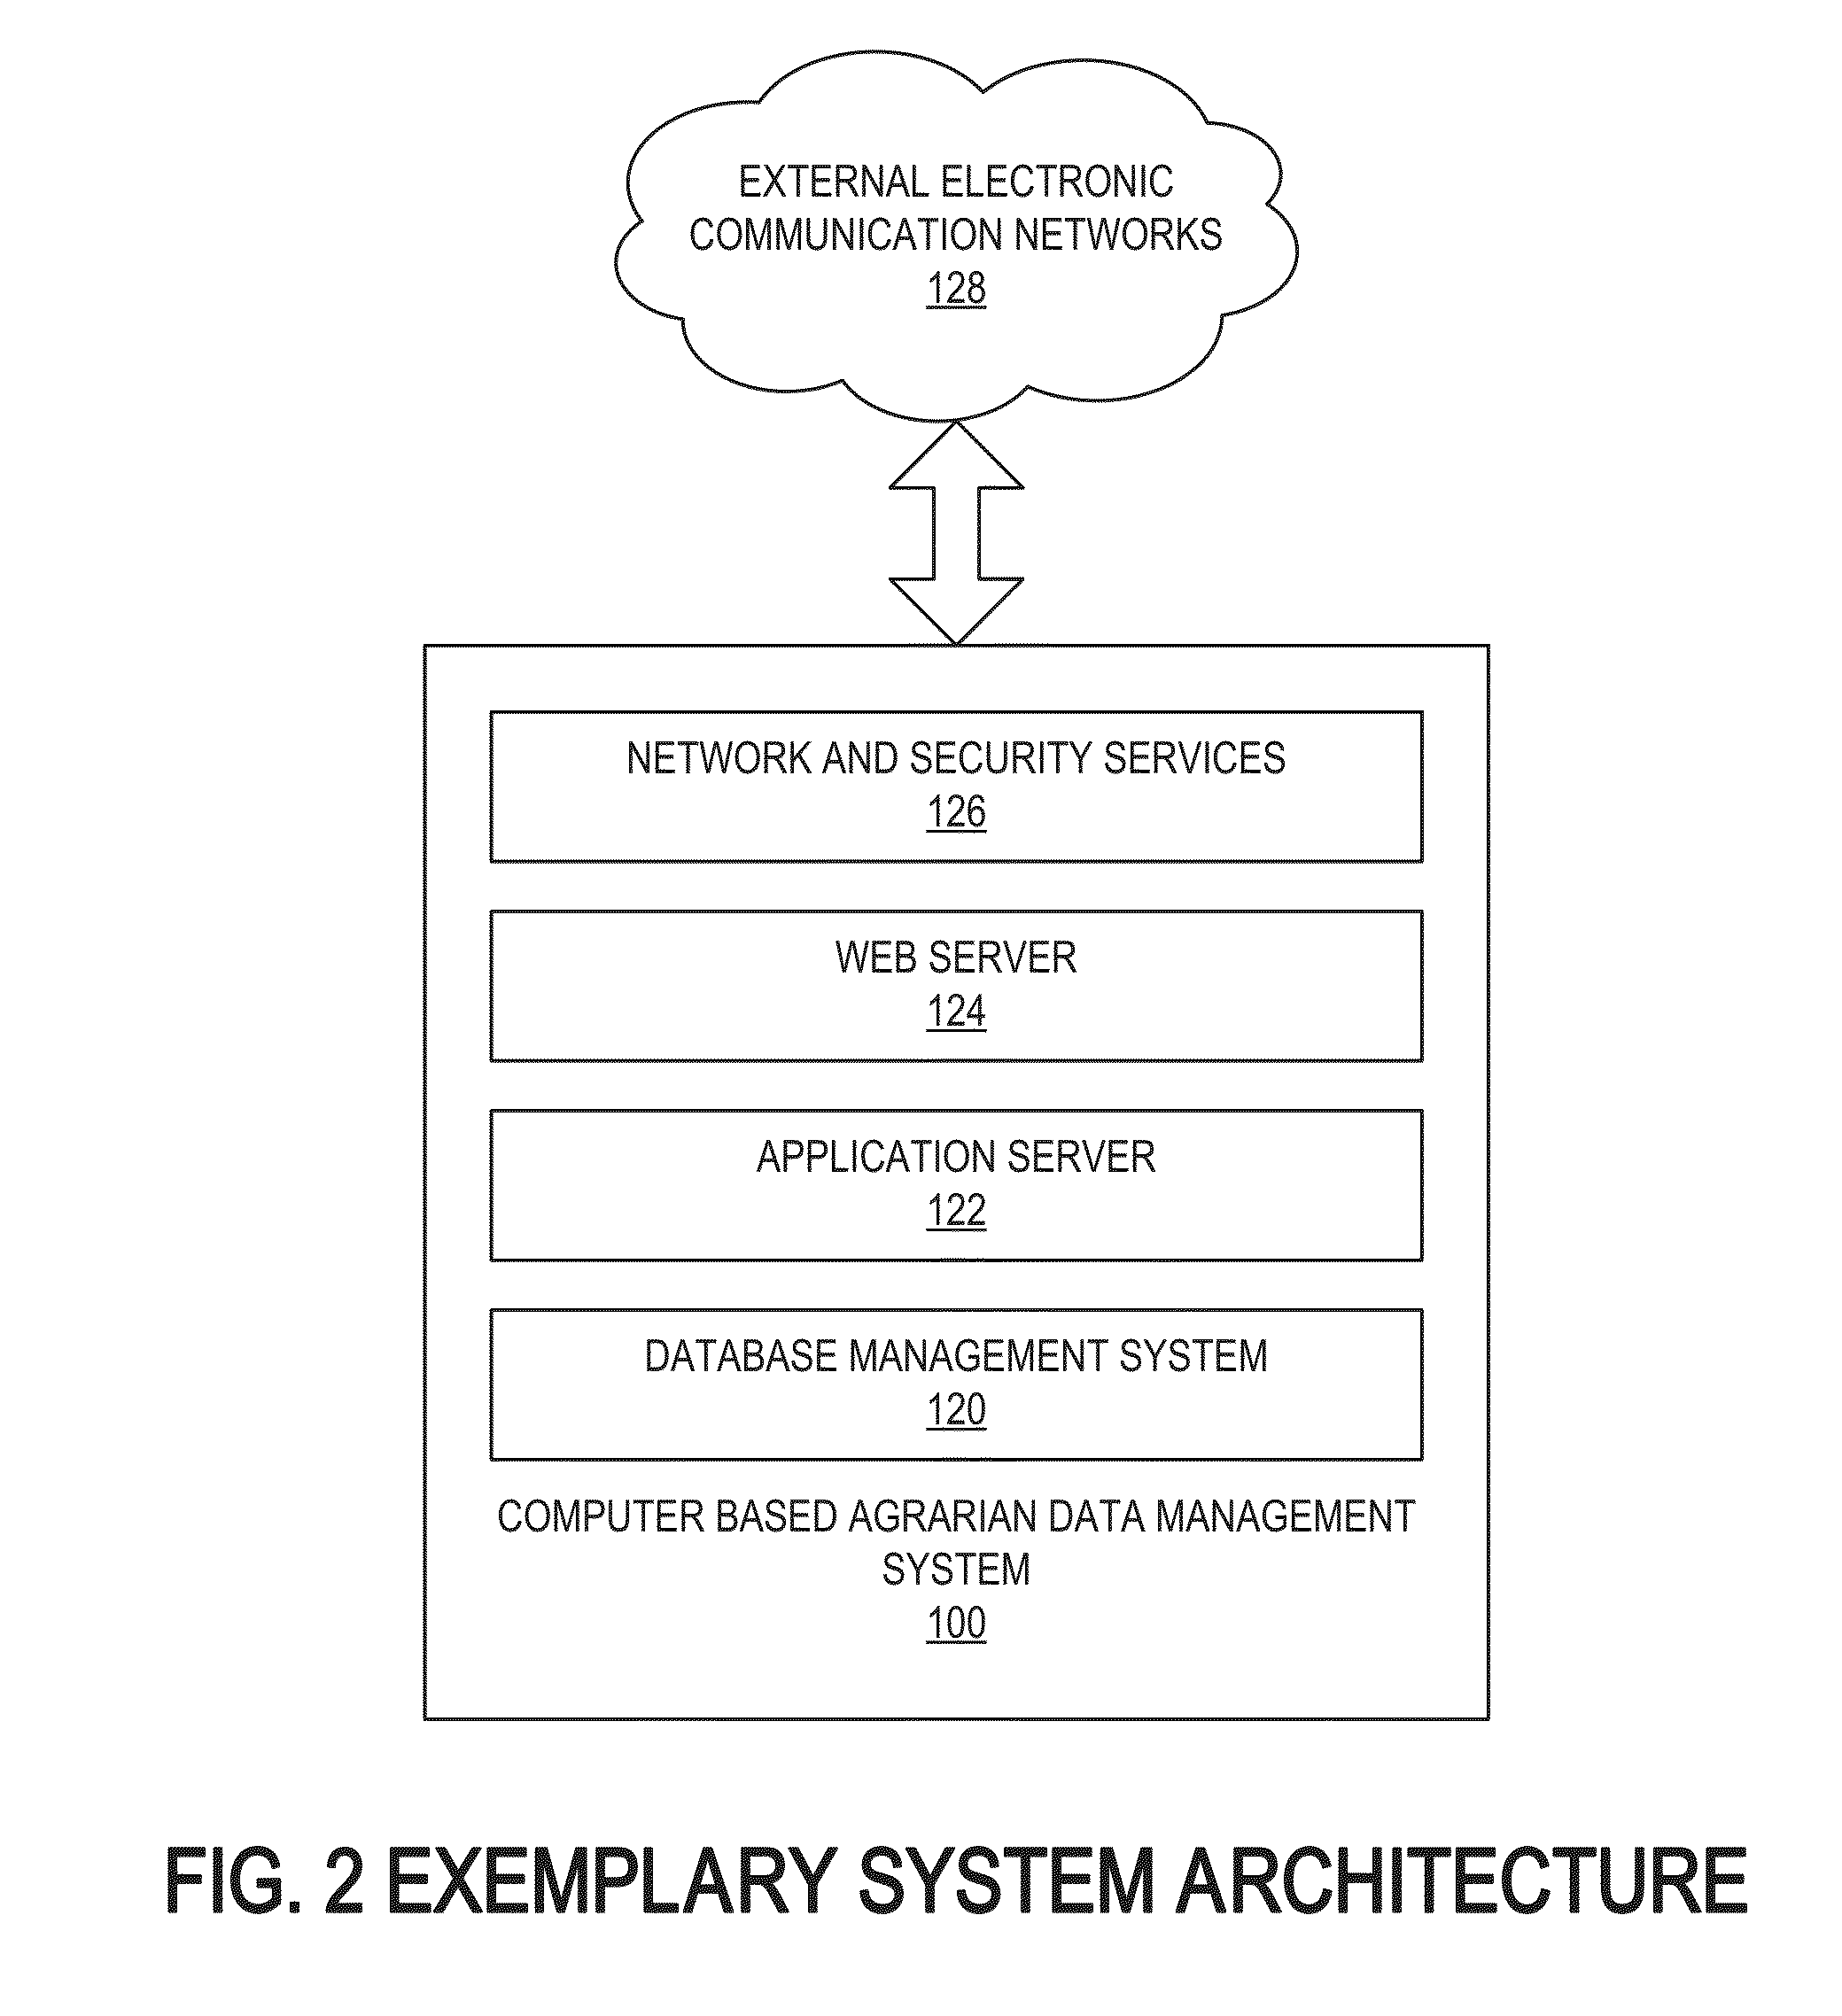 Systems, methods, and apparatuses for agricultural data collection, analysis, and management via a mobile device